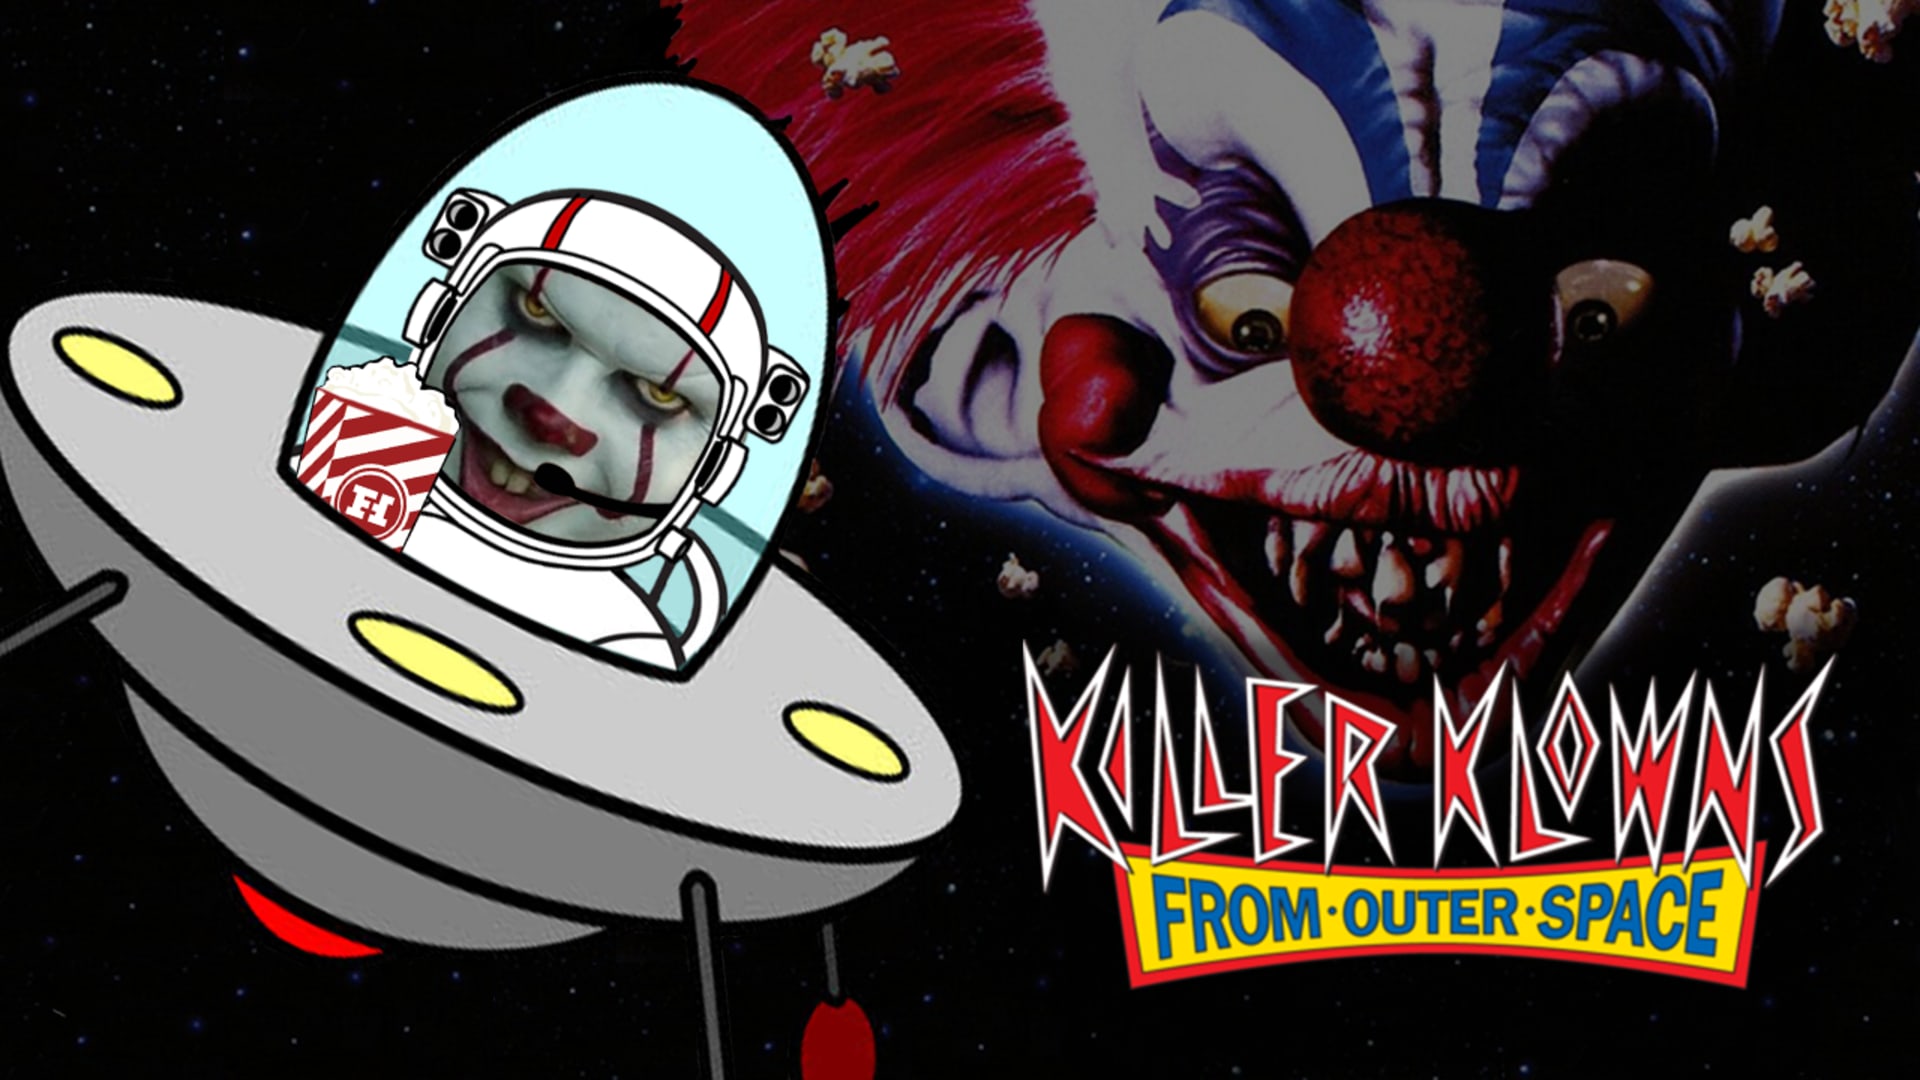 Killer from outer space. Killer Klowns from Outer Space. Killer Klowns from Outer Space персонажи.